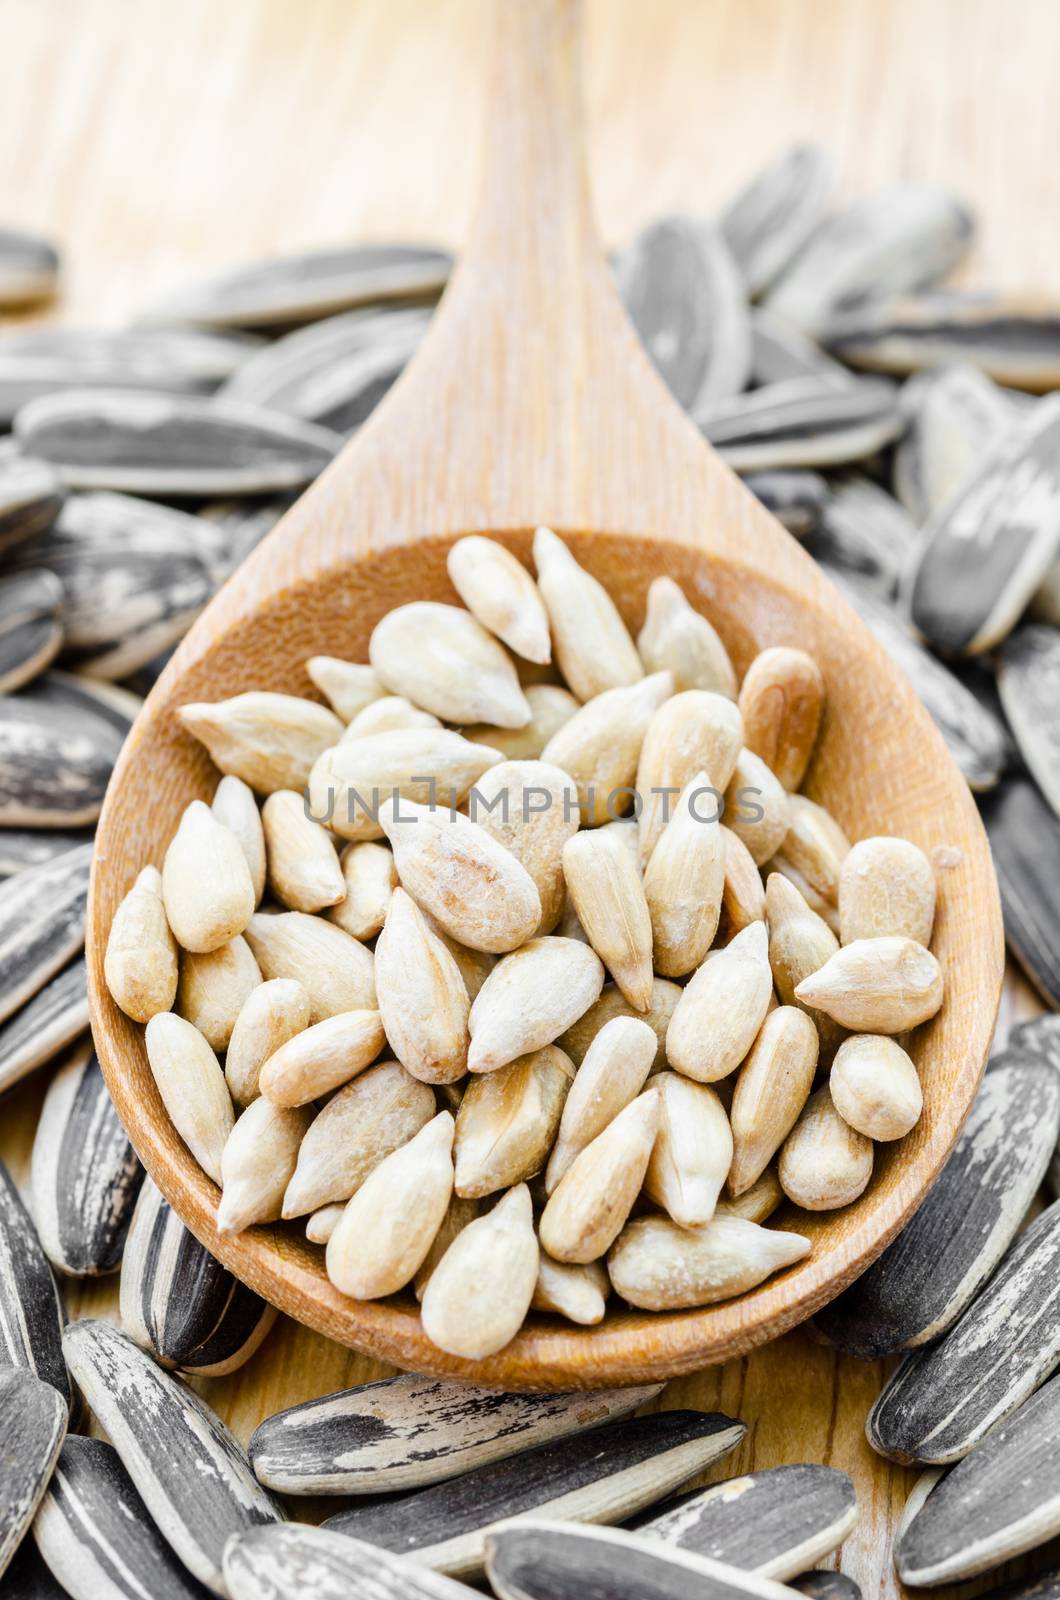 sunflower seeds in wooden spoon on wood background